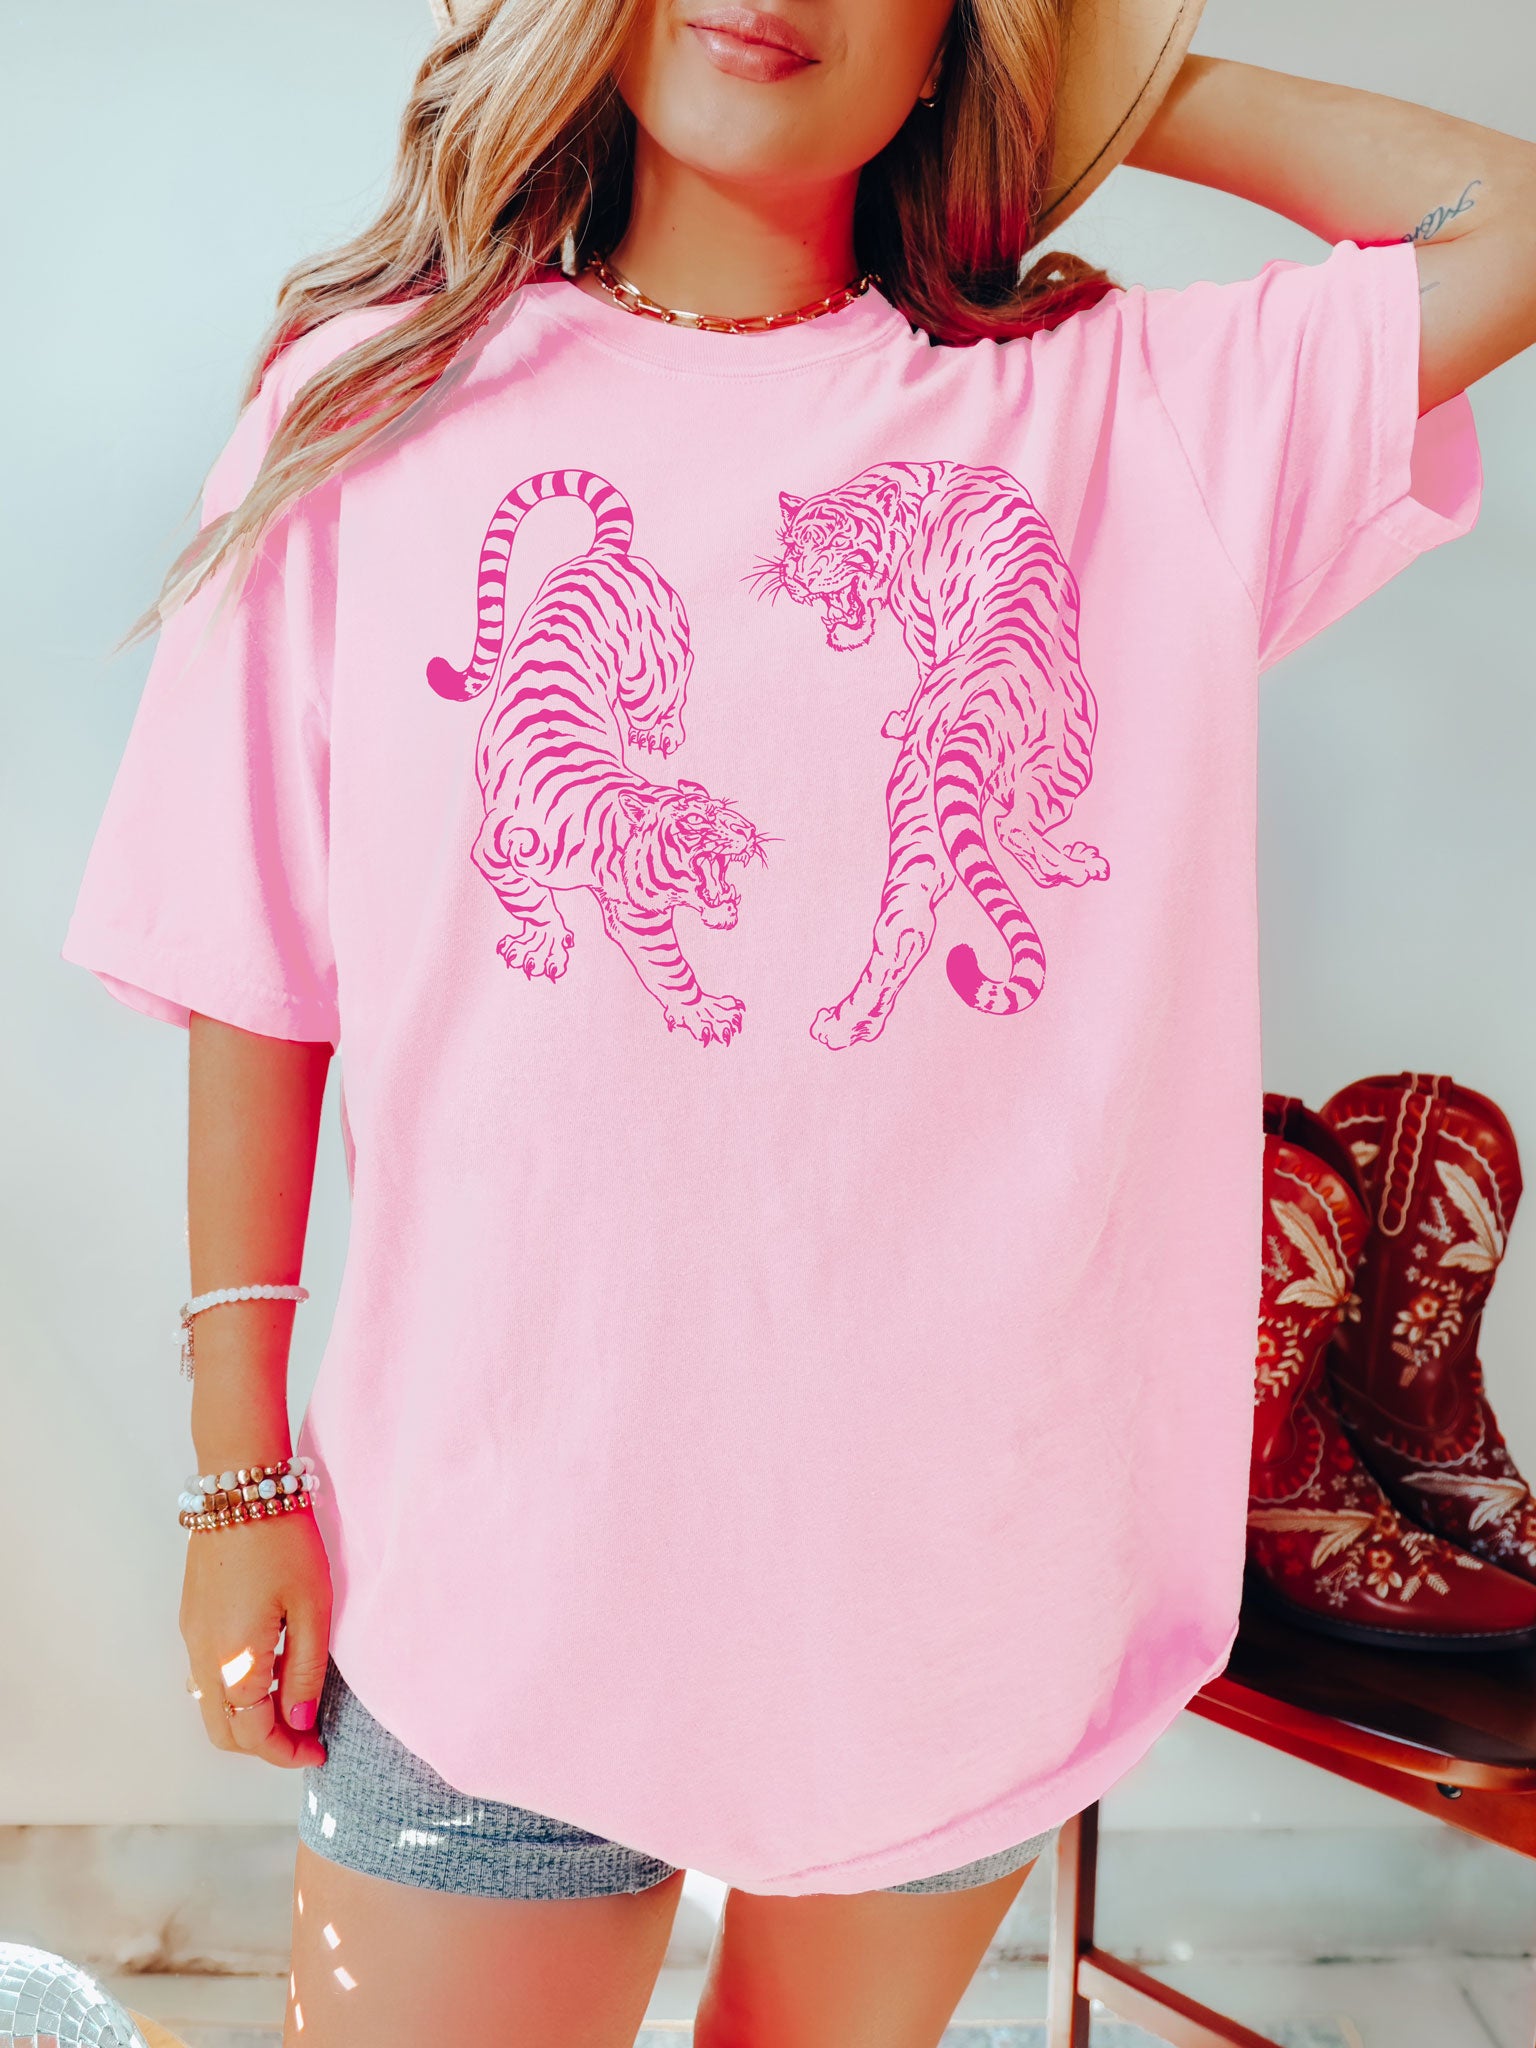 Tshirt Shop / Tees Tigers Tigers Meaningful Comfort – Colors® Pink Vintage